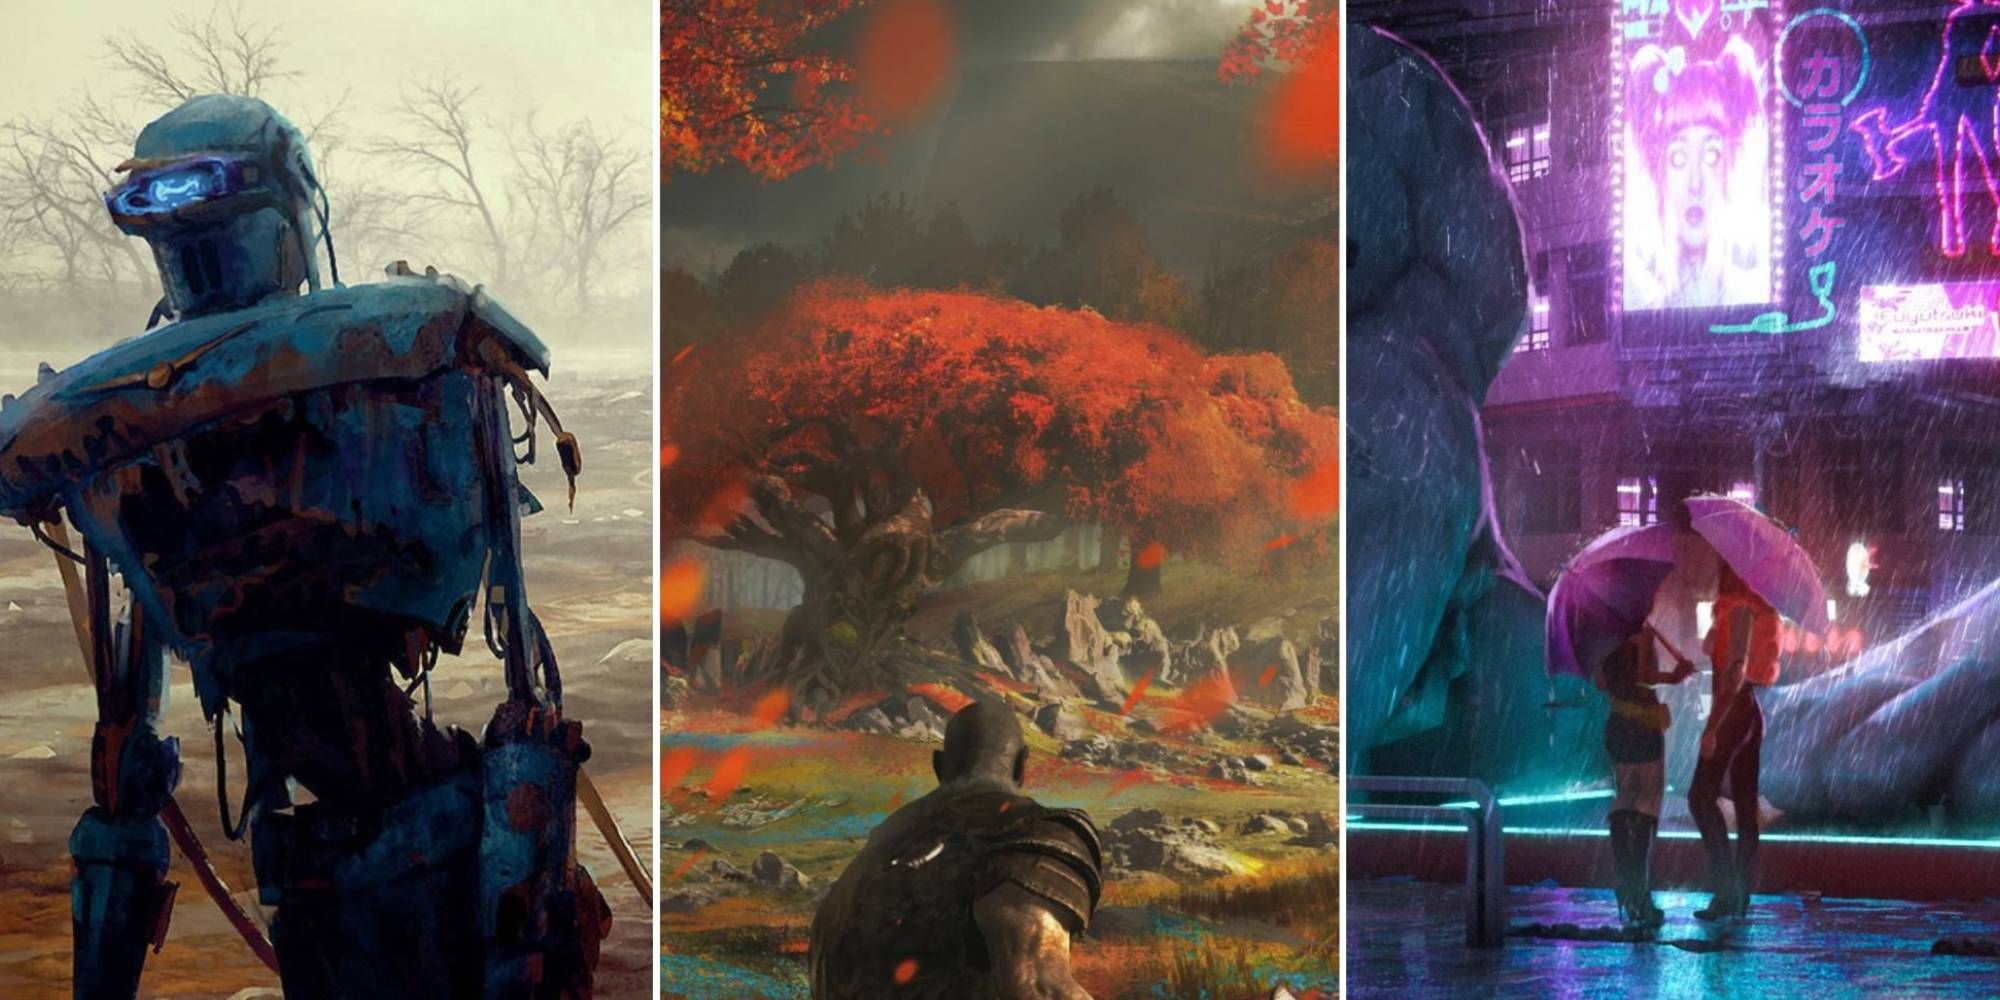 A collage of images featuring Fallout 4, God of War and Cyberpunk 2077 concept art